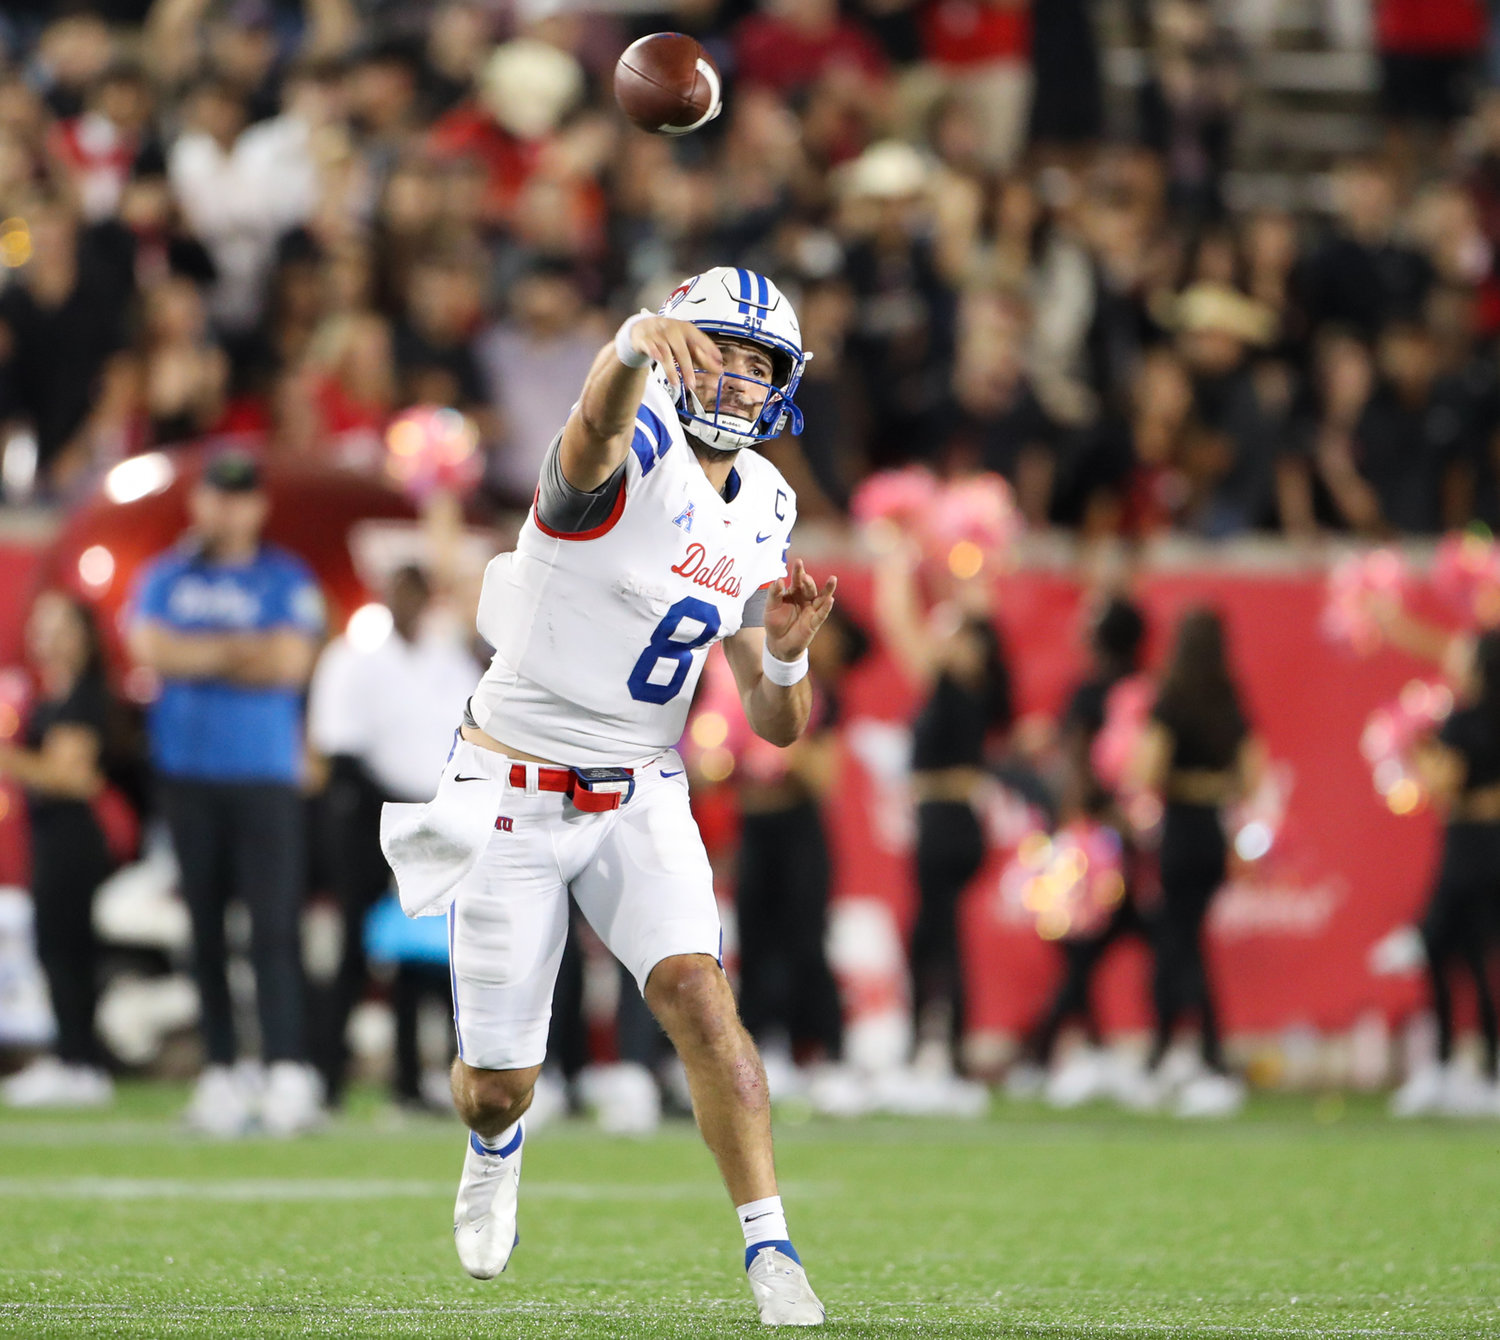 SMU Mustangs quarterback Tanner Mordecai (8) passes the ball during an NCAA football game between Houston and SMU on October 30, 2021 in Houston, Texas.